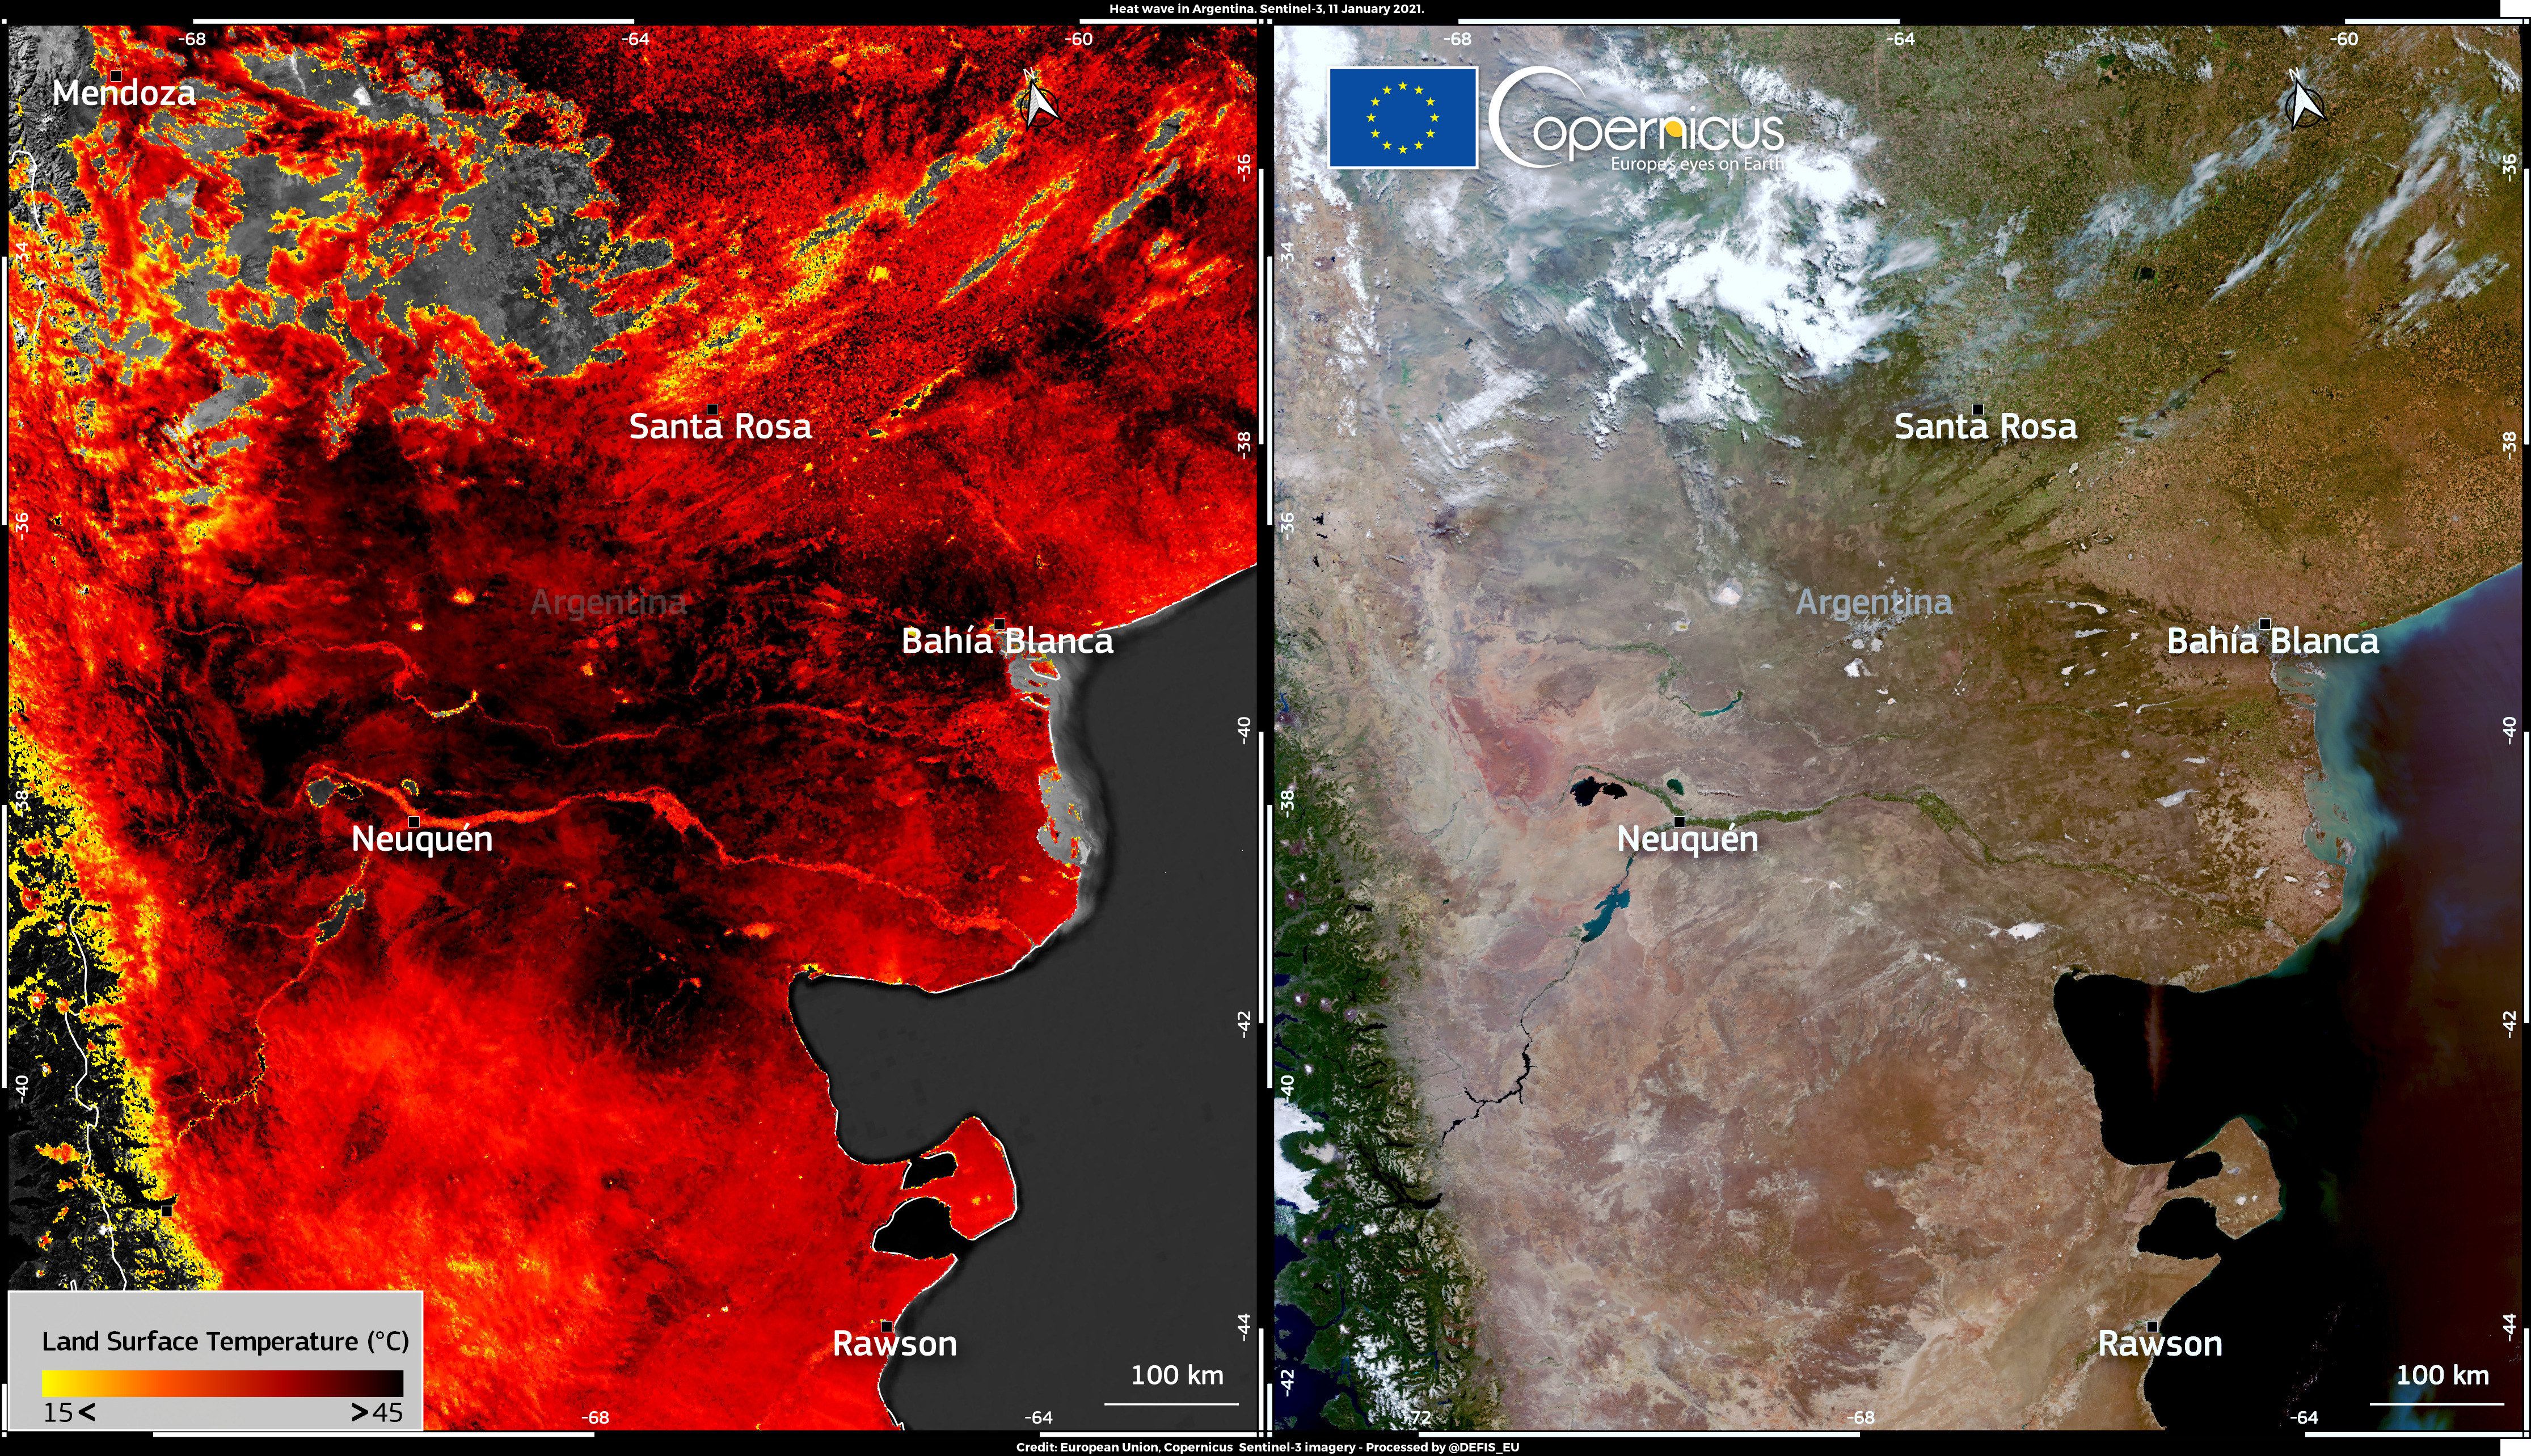 Satellite view with heat map showing temperatures rising to 45C (113F) in Argentina on 11 January 2022. At the start of 2022, Argentina faced a historic heatwave with temperatures soaring above 40°C. On the day this image was acquired, Buenos Aires recorded a temperature of 41.1°C, the second highest in the history of the Argentine capital. Photo: European Union, Copernicus Sentinel-3A imagery